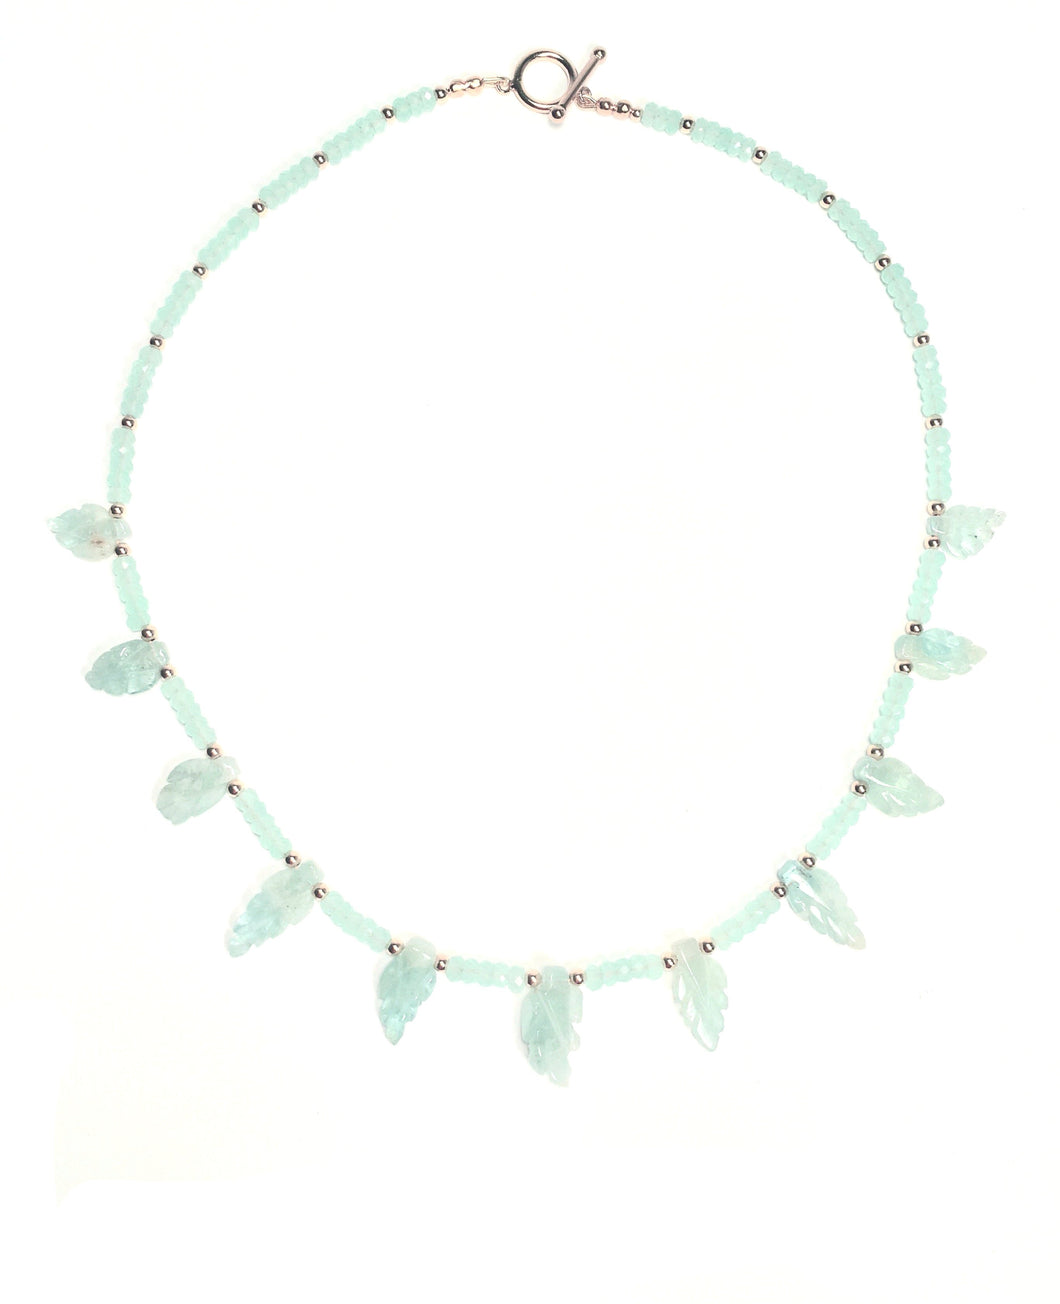 Natural Aquamarine, Hand-Carved Leaf Necklace with Peruvian Chalcedony Gems